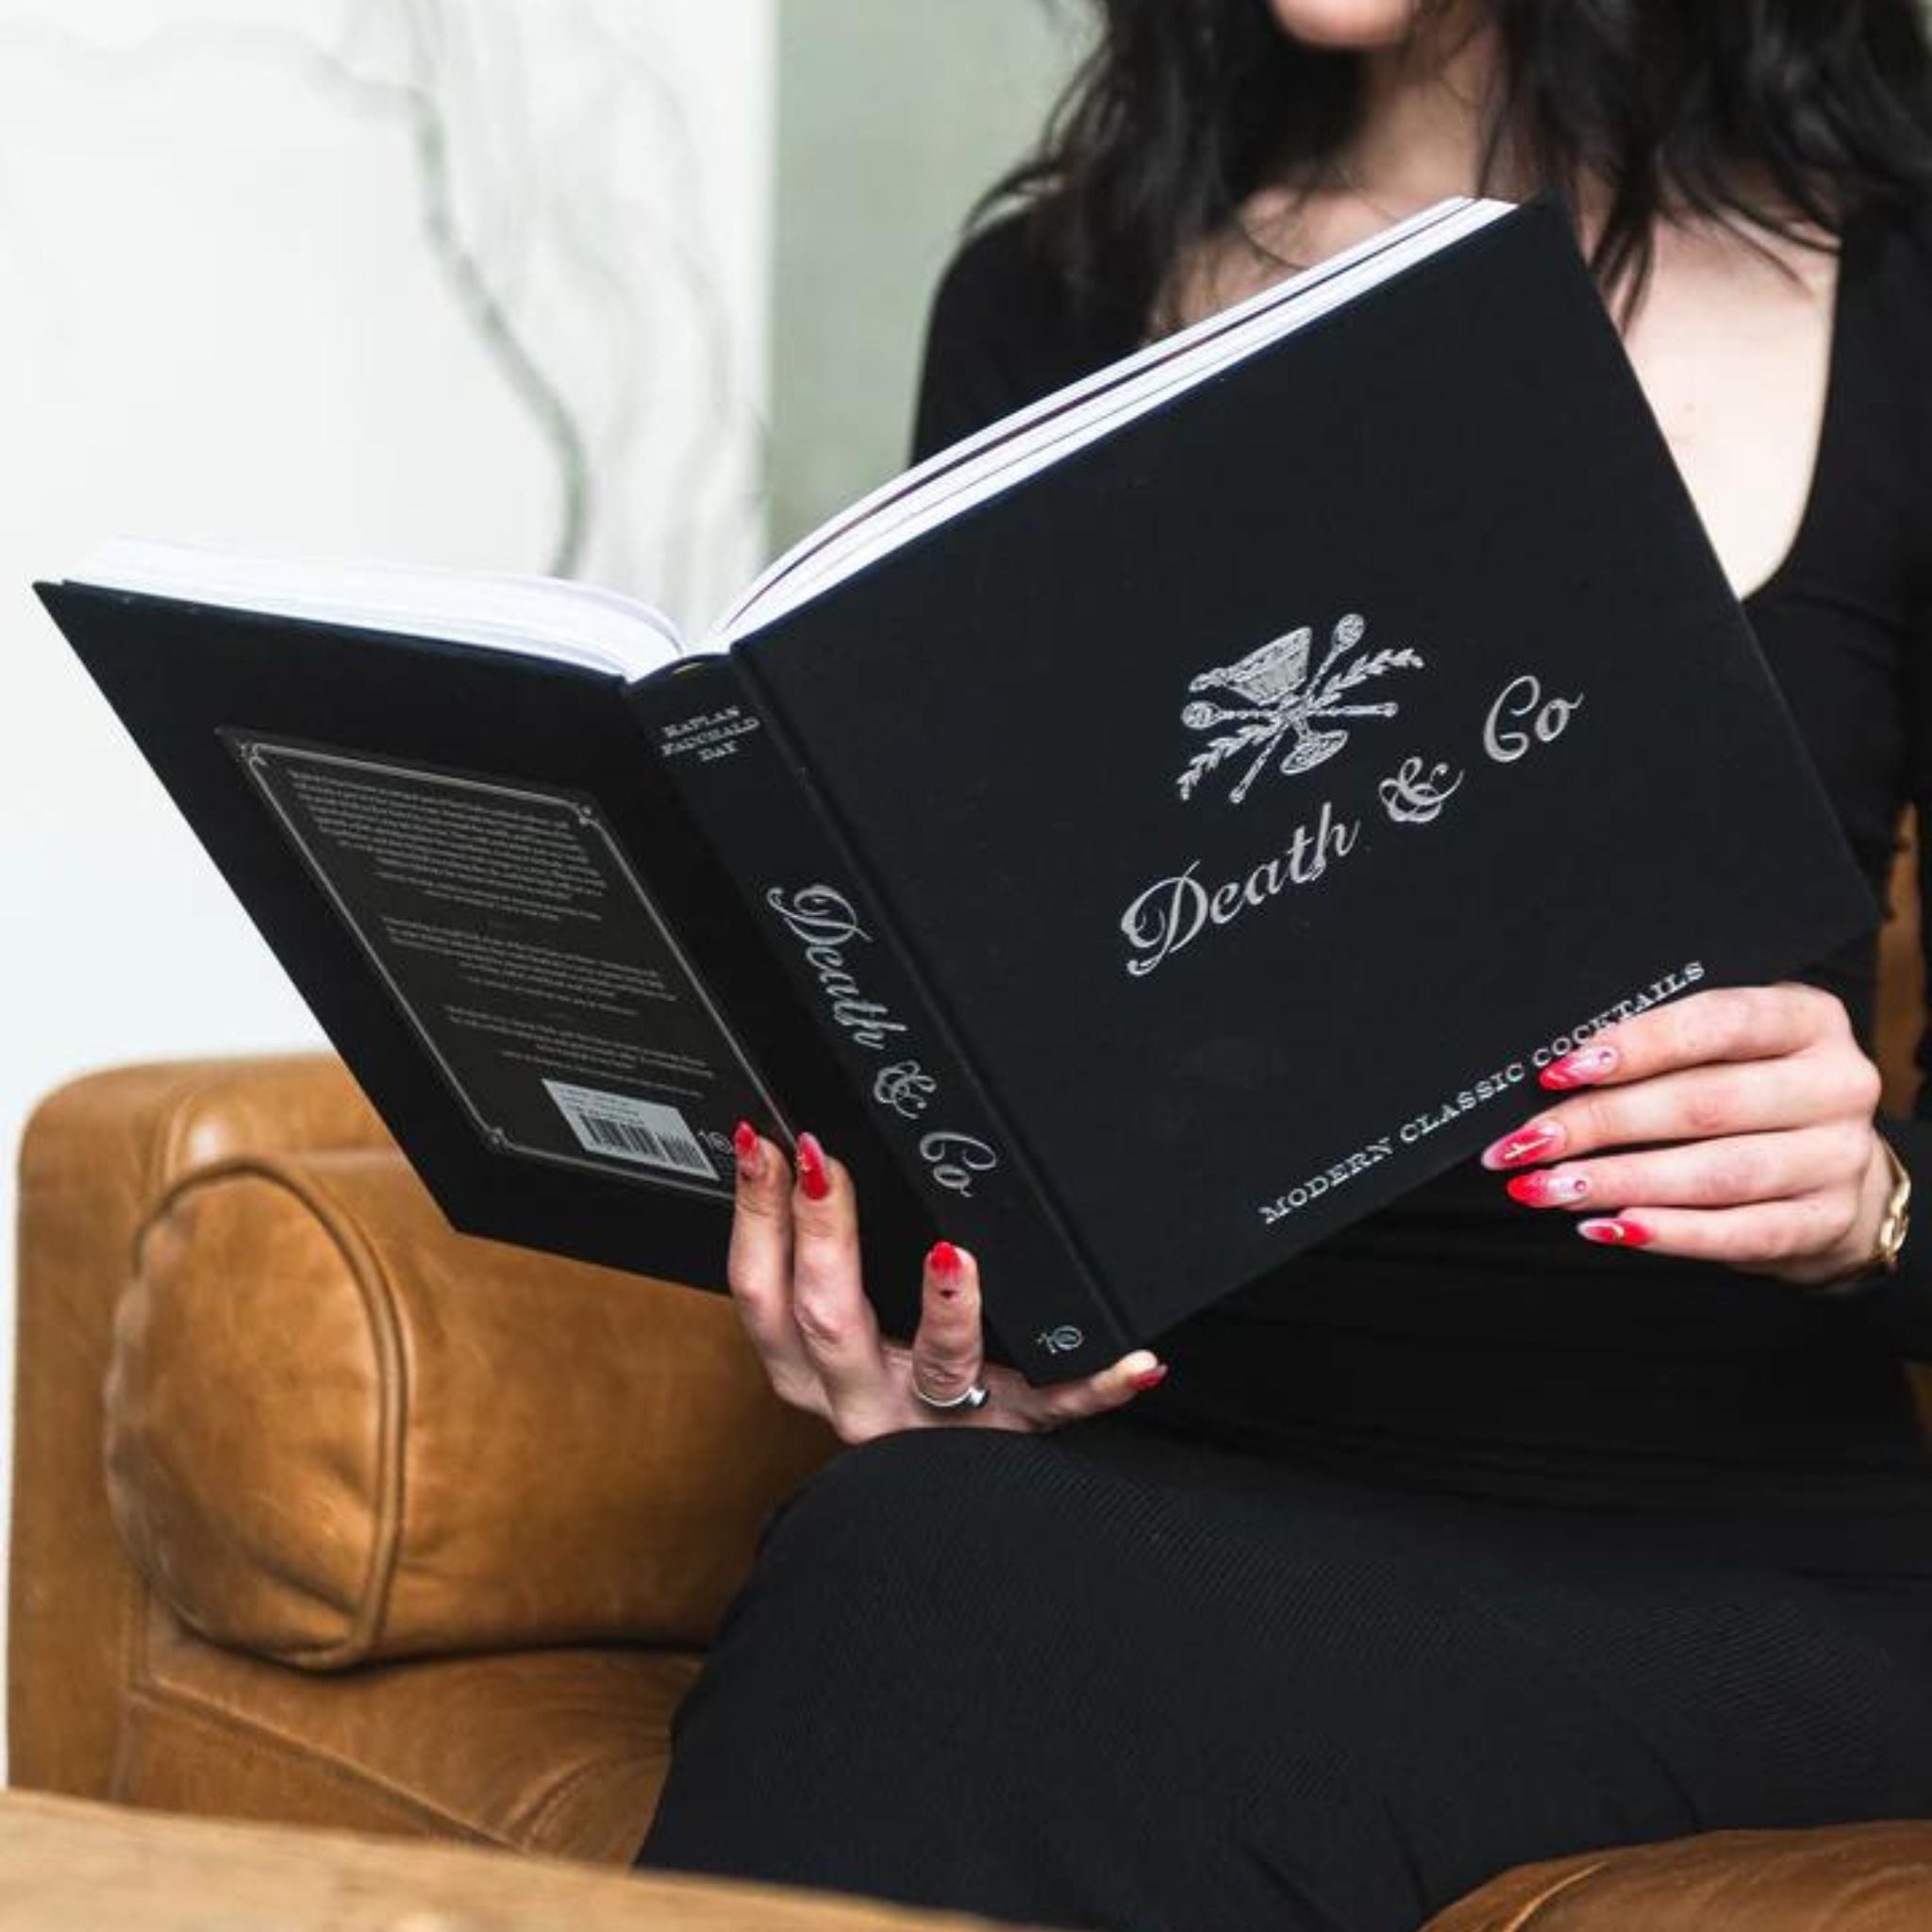 A woman reading the book by Death & Co.